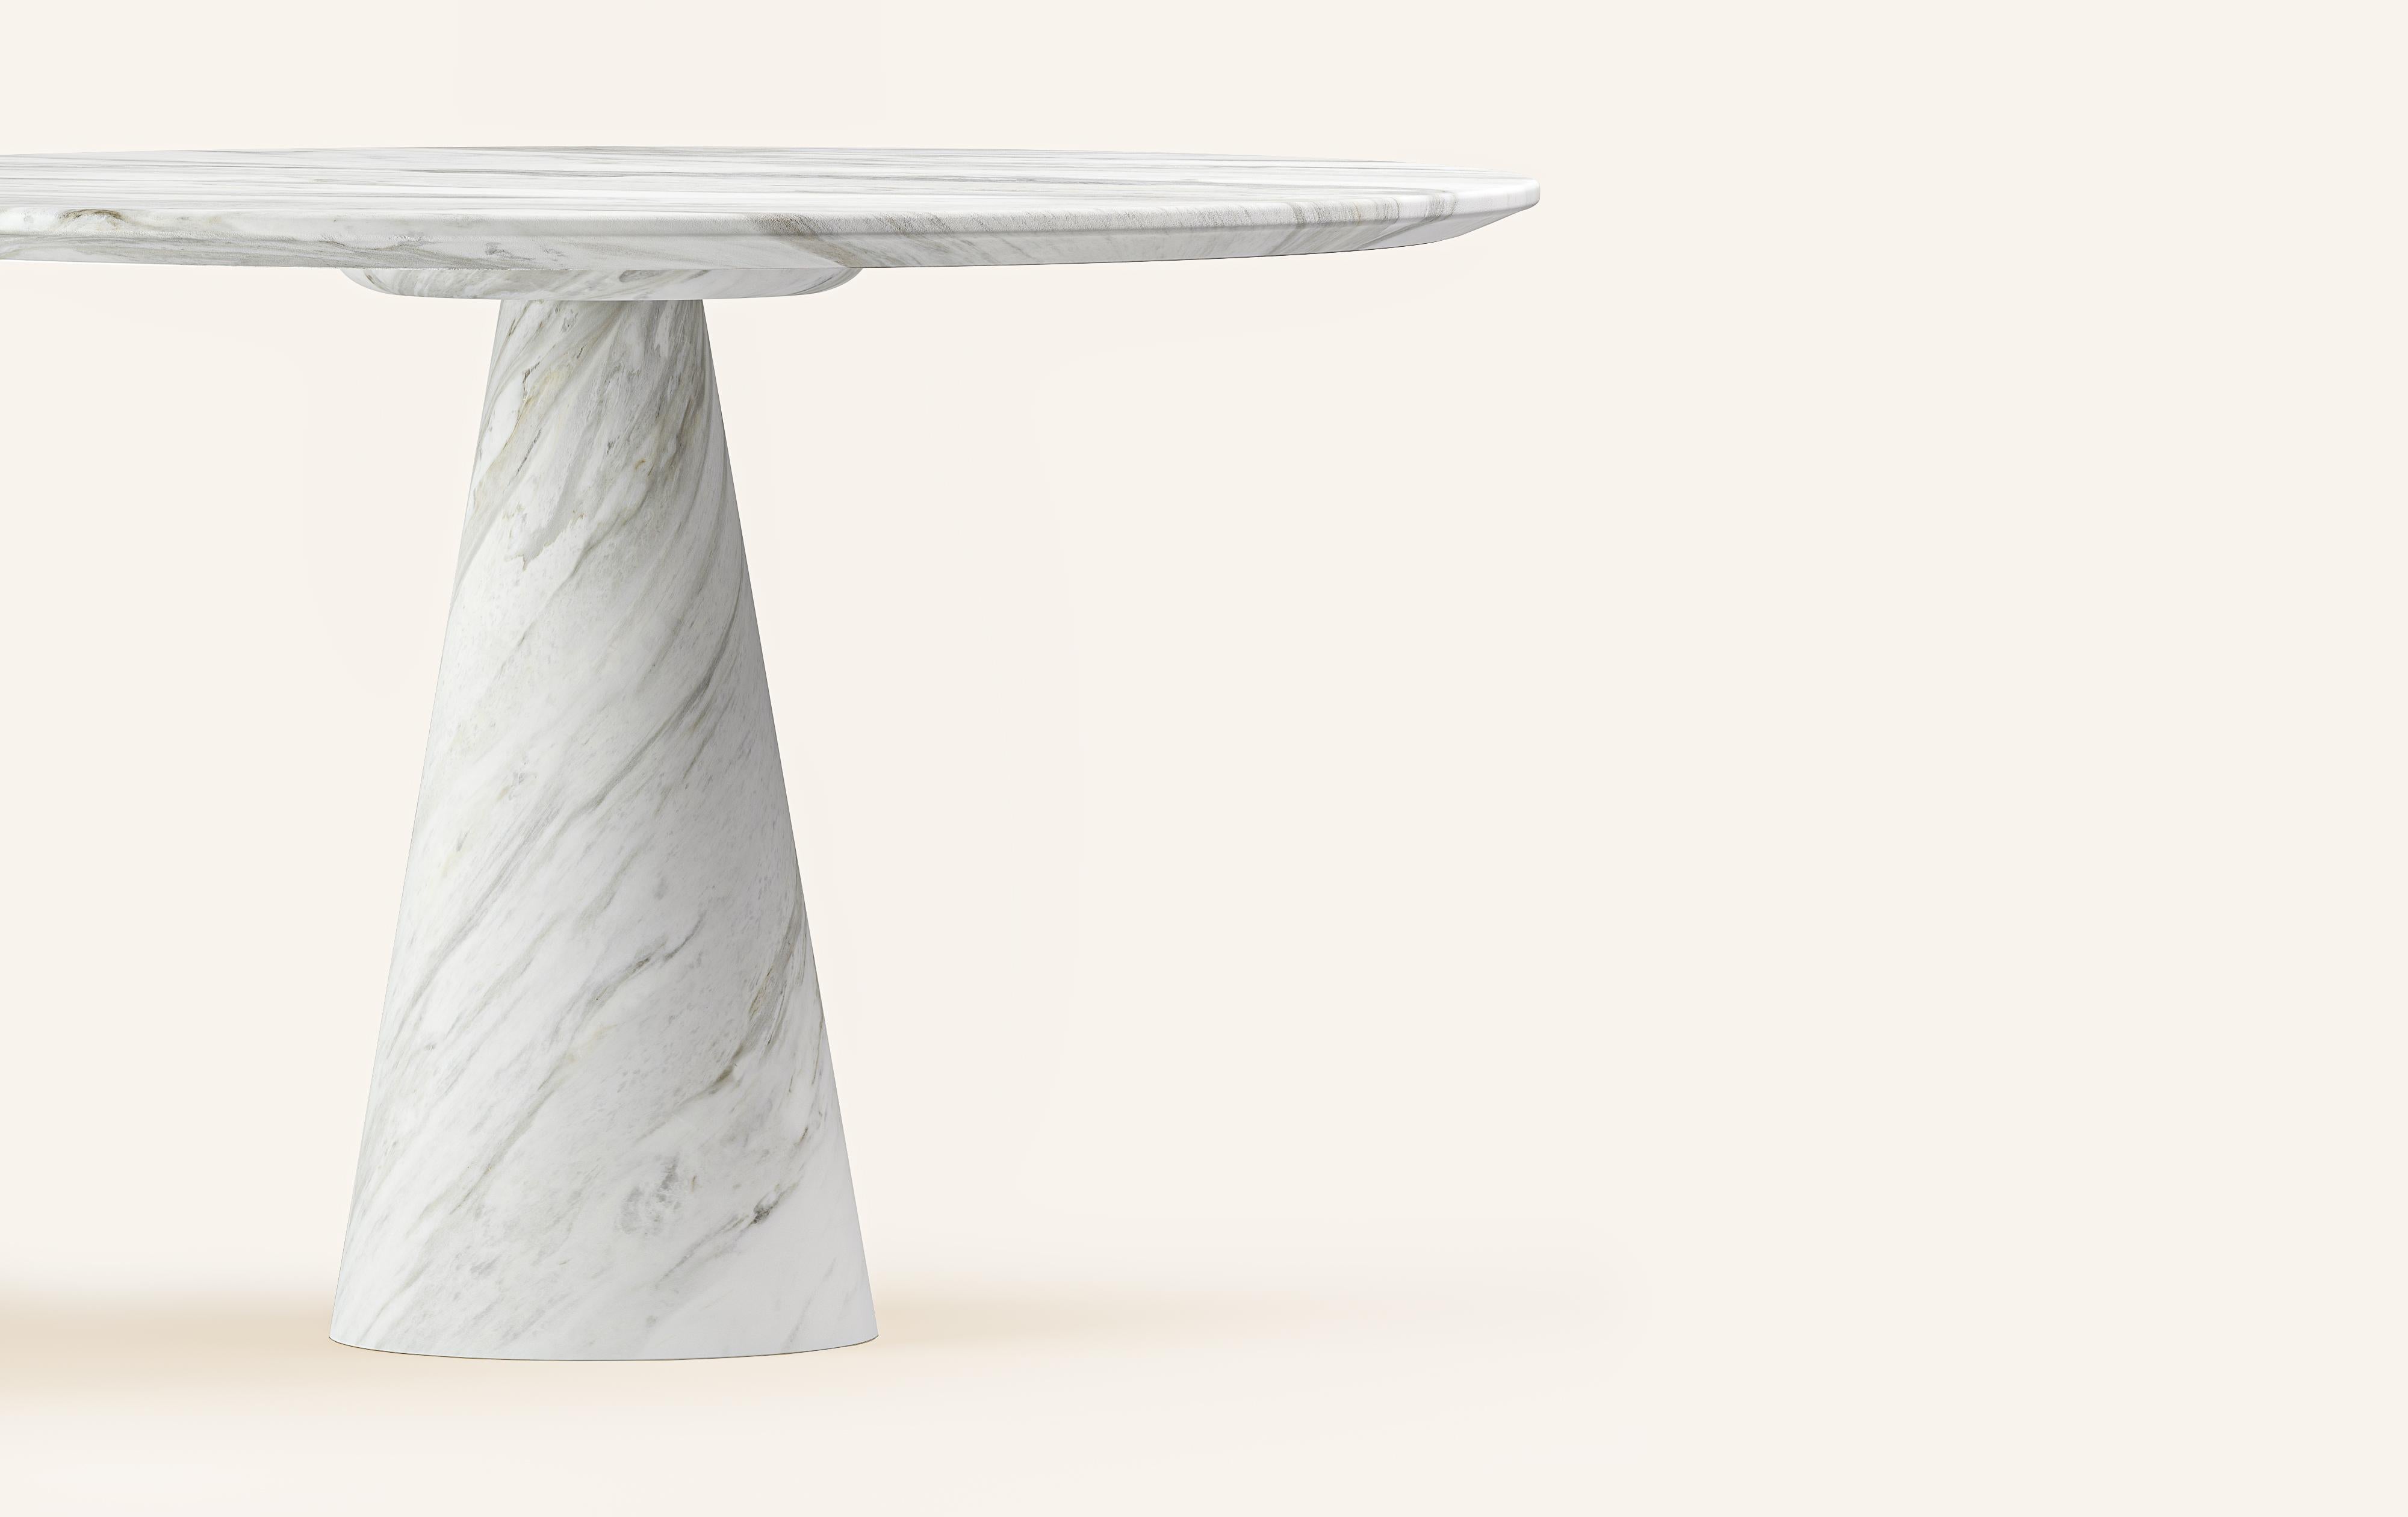 Organic Modern FORM(LA) Cono Round Dining Table 42”L x 42”W x 30”H Volakas White Marble For Sale